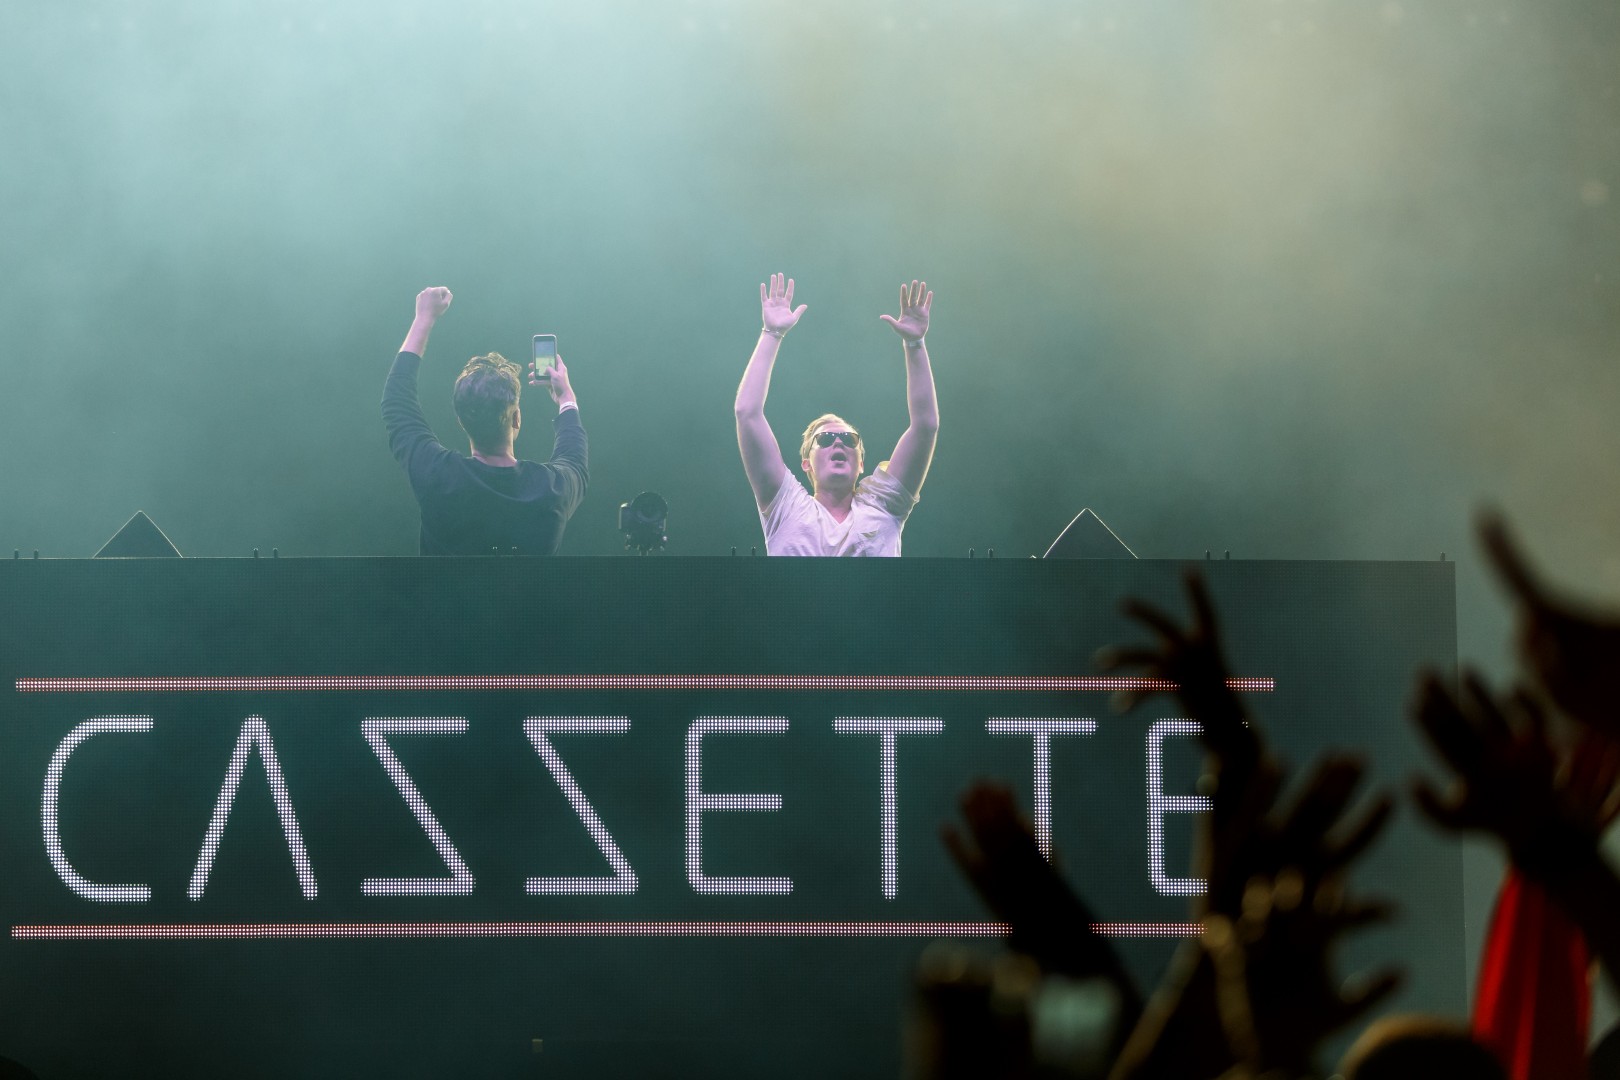 Cazzette at Cluj Arena in Cluj-Napoca on August 1, 2015 (ea7993477c)